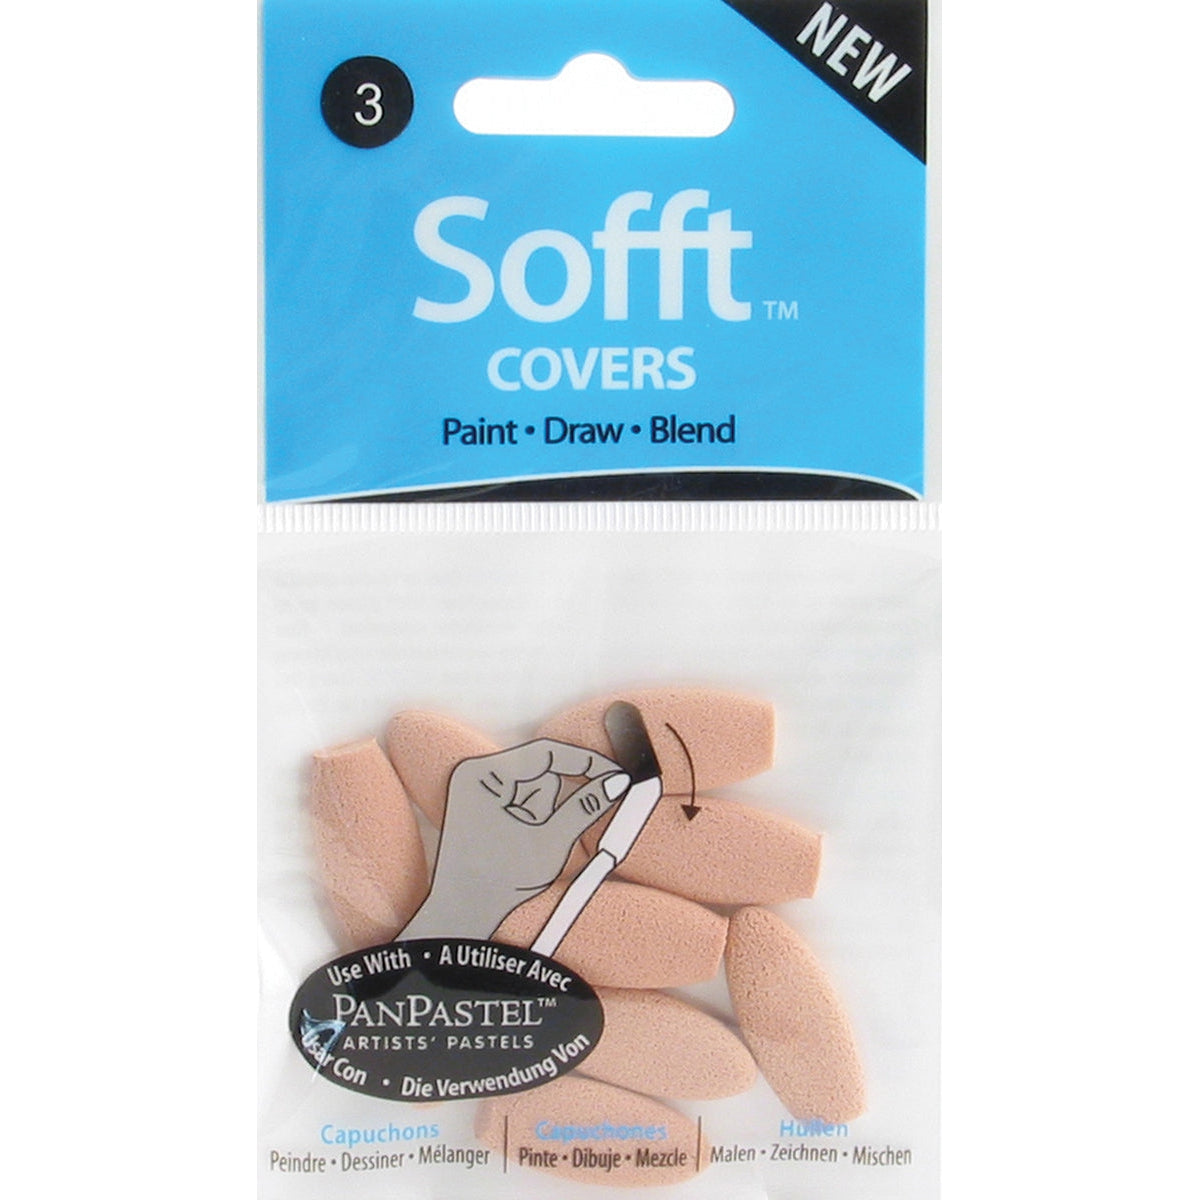 PanPastel Sofft #3 Oval Covers 10 Pack